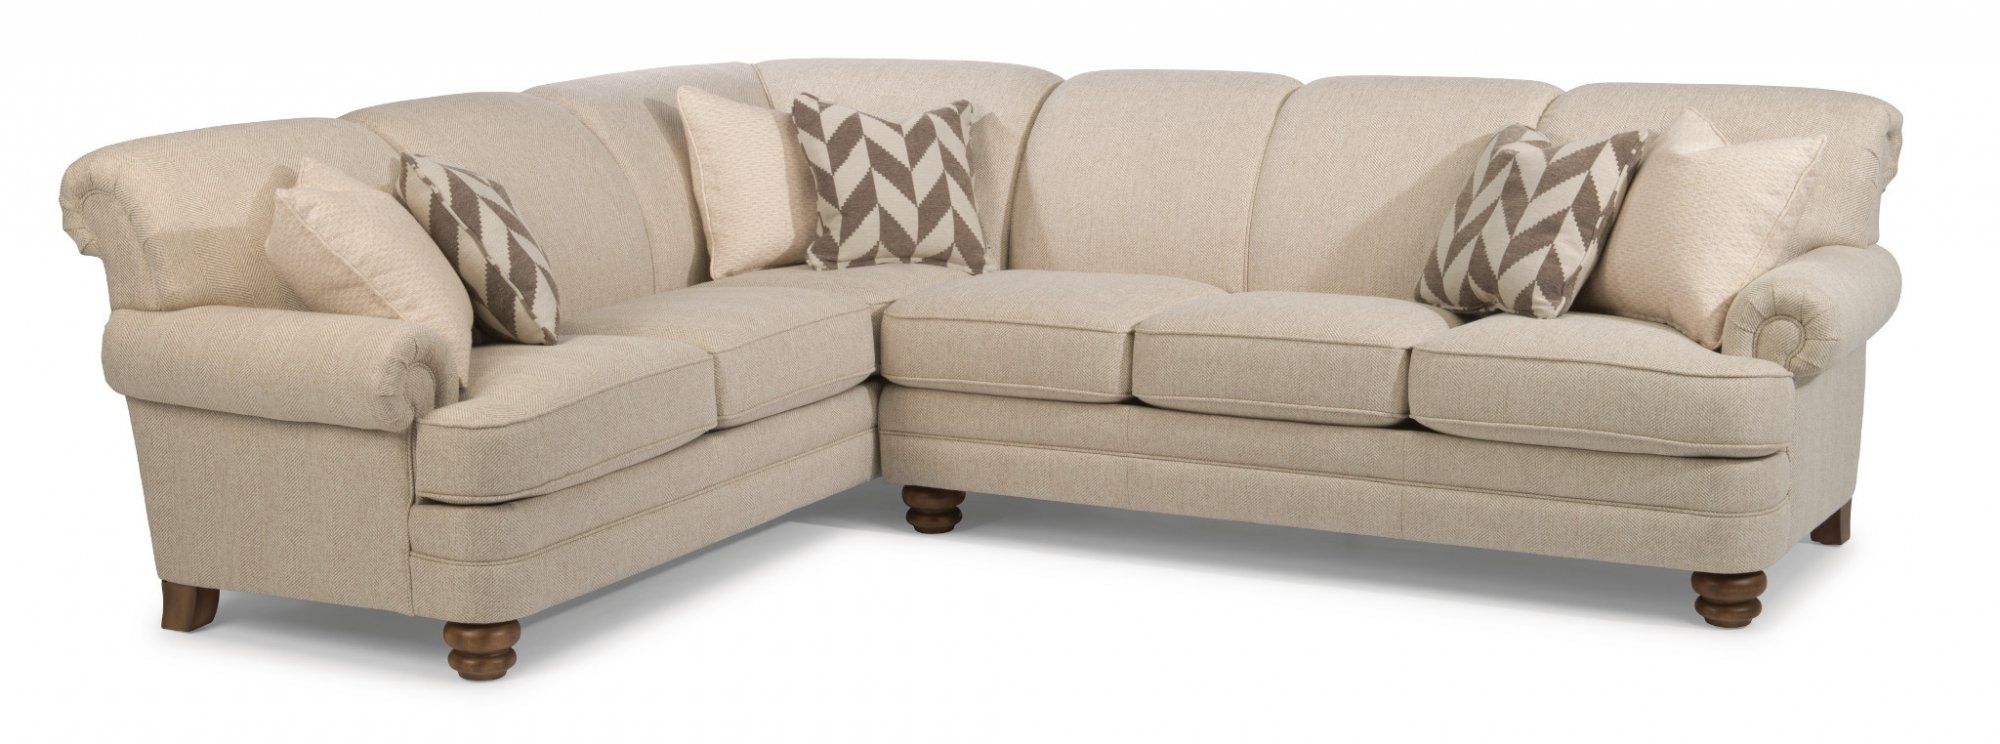 Best Sectional Sofa With Nailhead Trim 89 For Your Best Sleeper Sofa Throughout Sectional Sofas With Nailhead Trim (Photo 8 of 10)